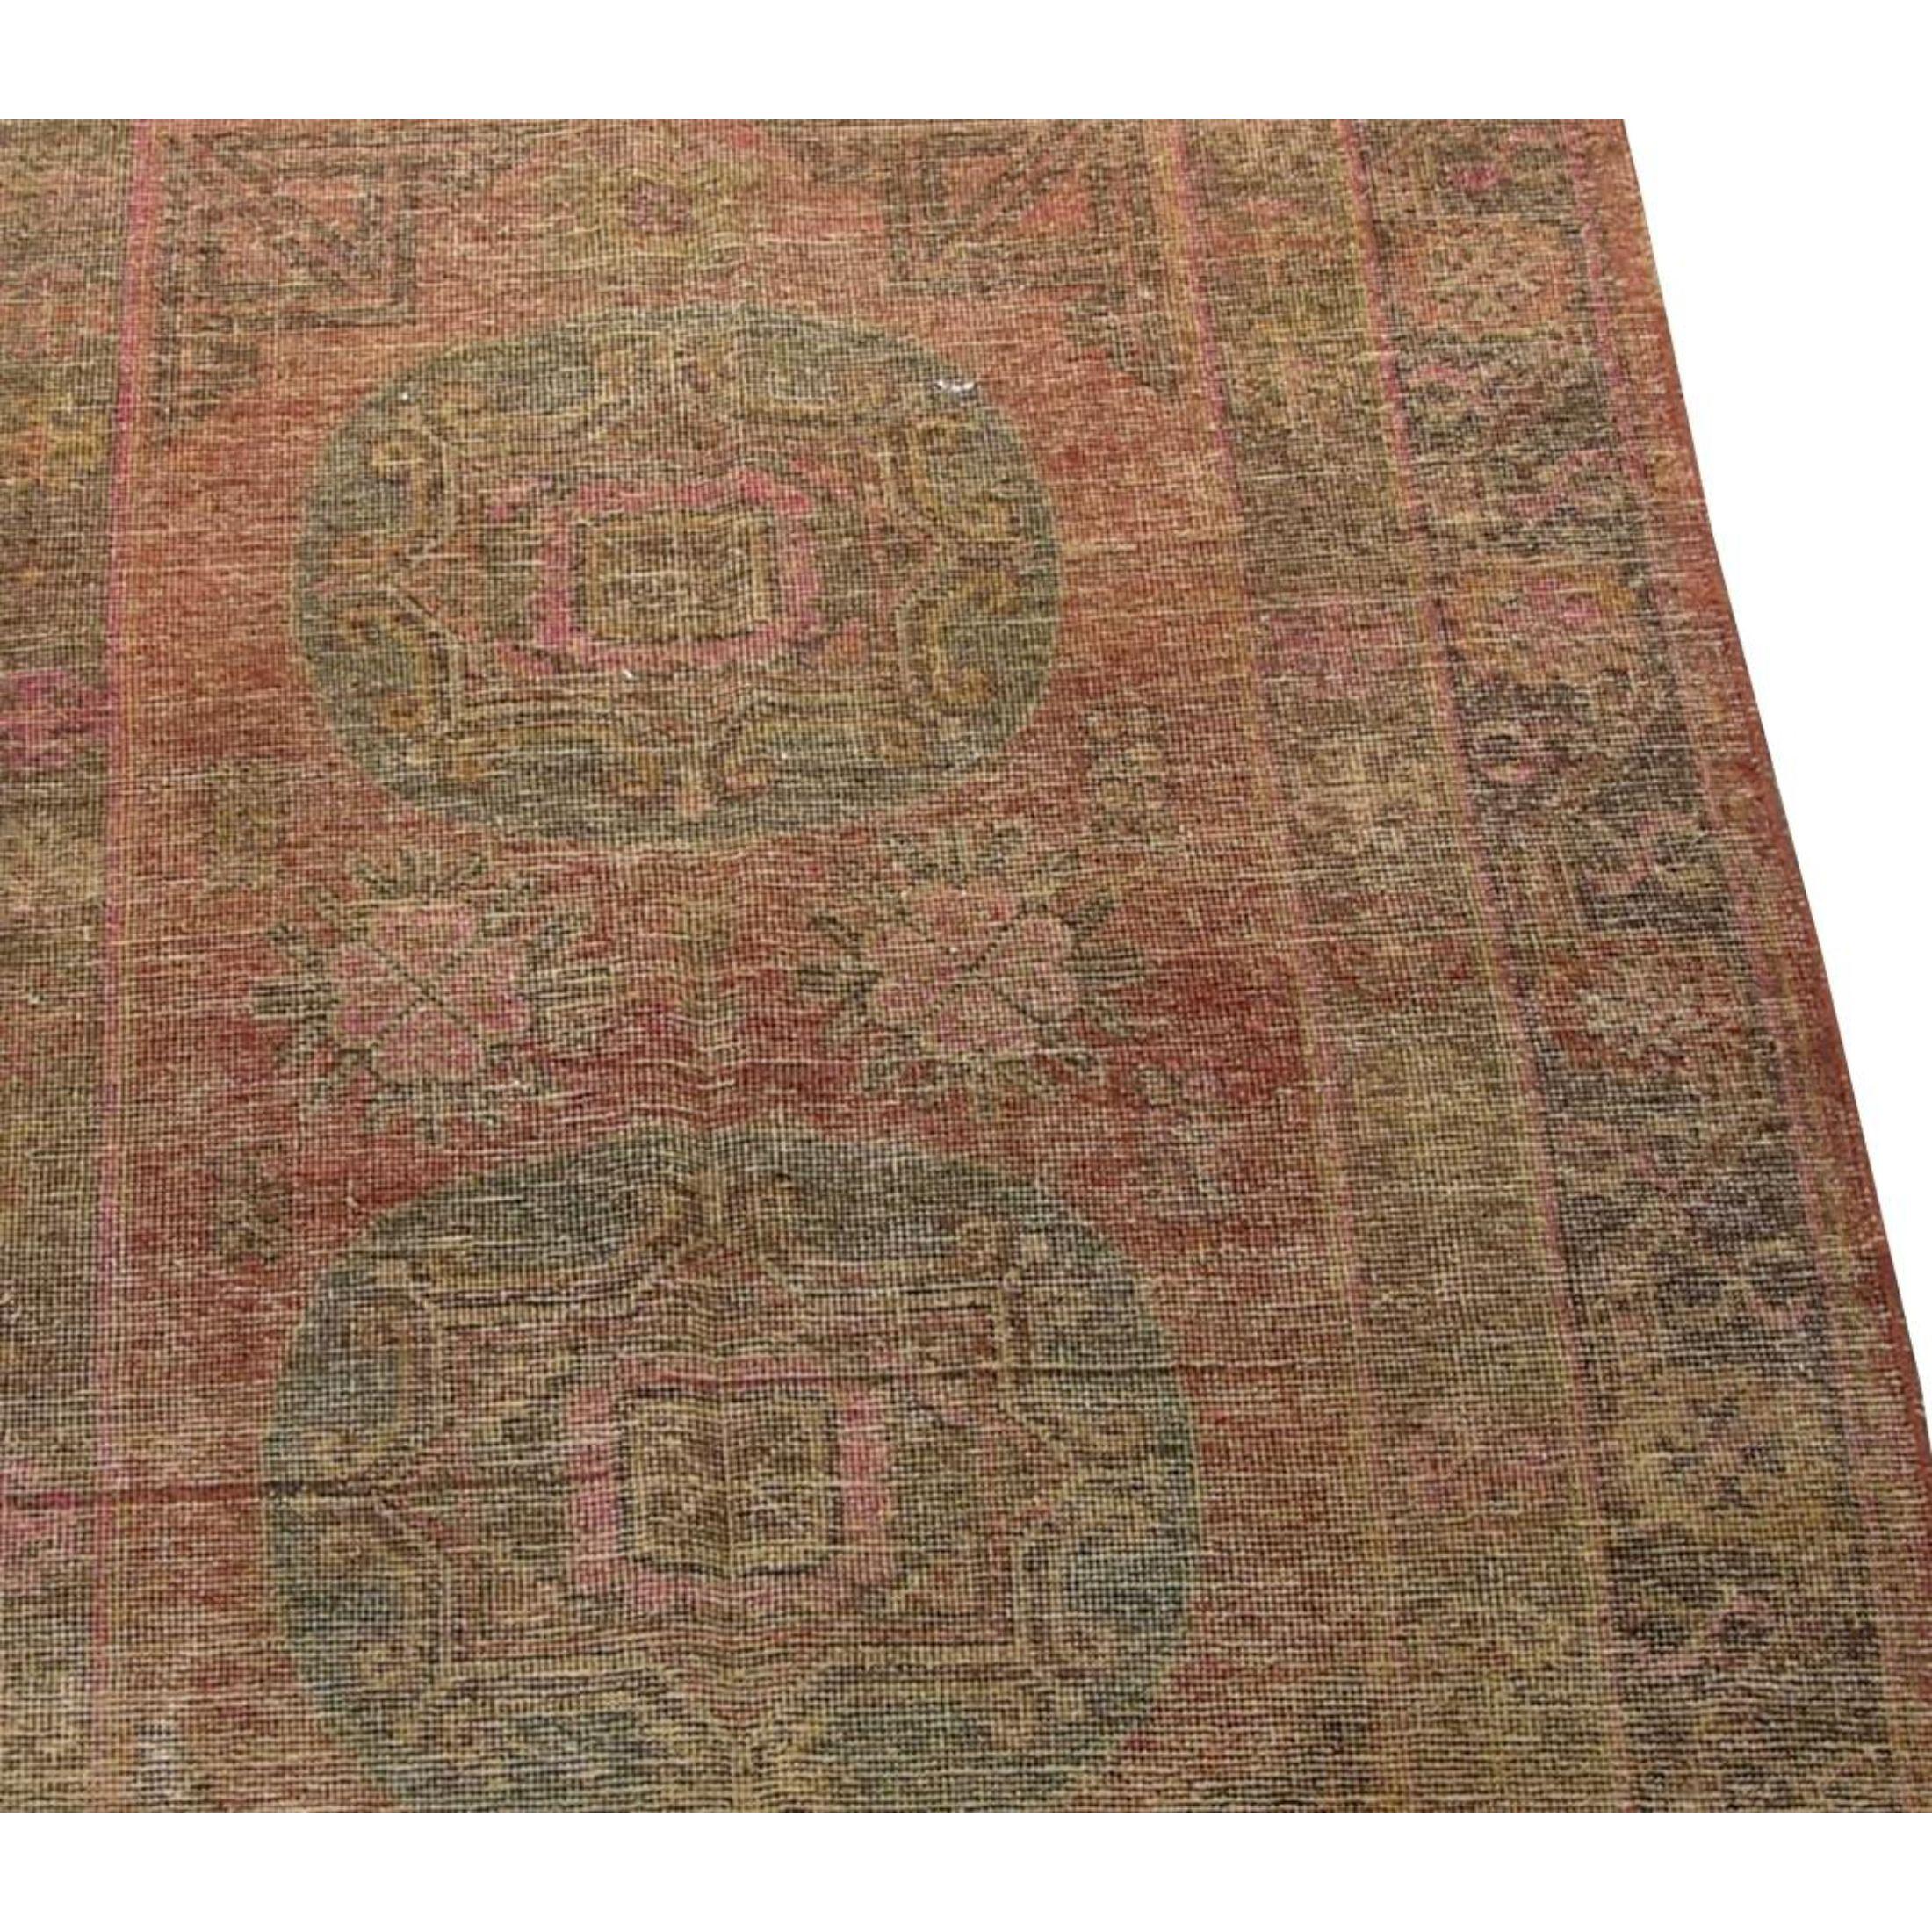 Antique Uzbek Samarkand Tribal Rug 7'7'' X 4'3'' In Good Condition For Sale In Los Angeles, US